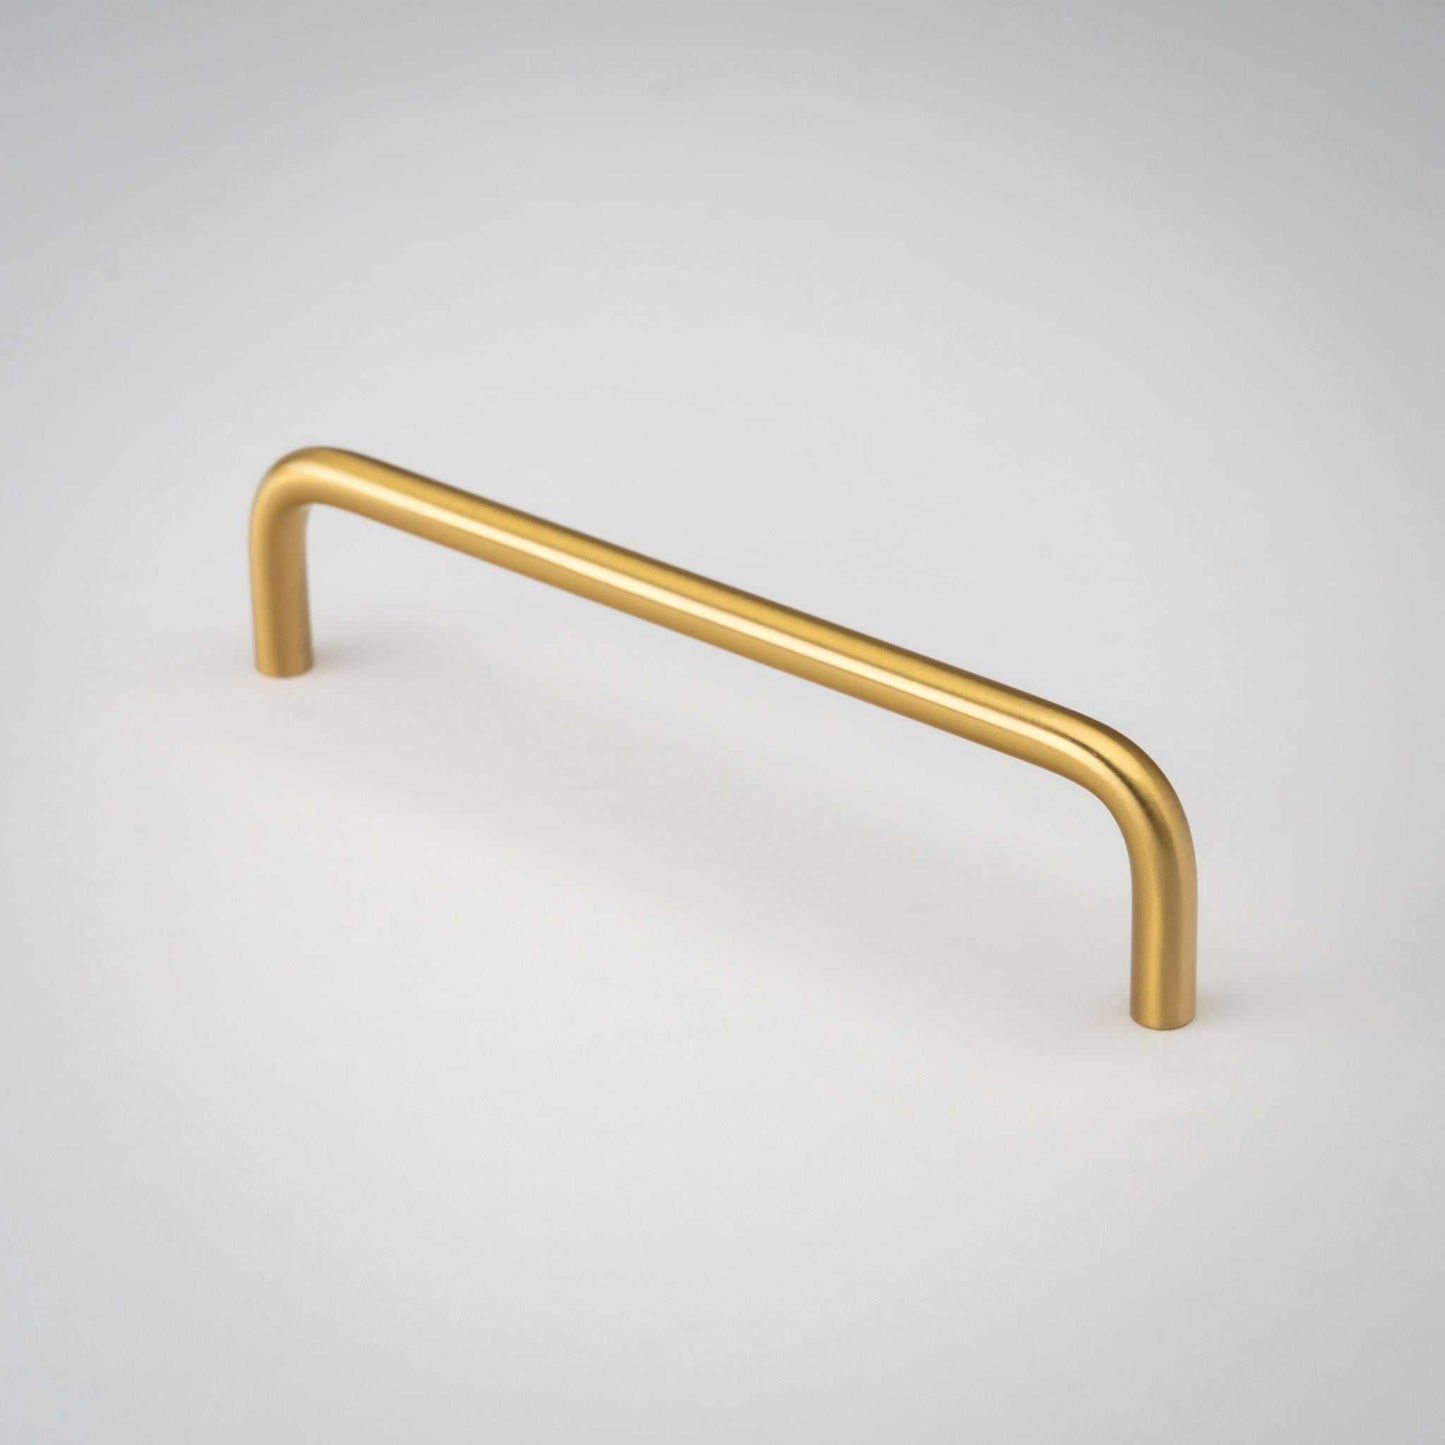 5" Arch in satin brass gloss lacquer finish